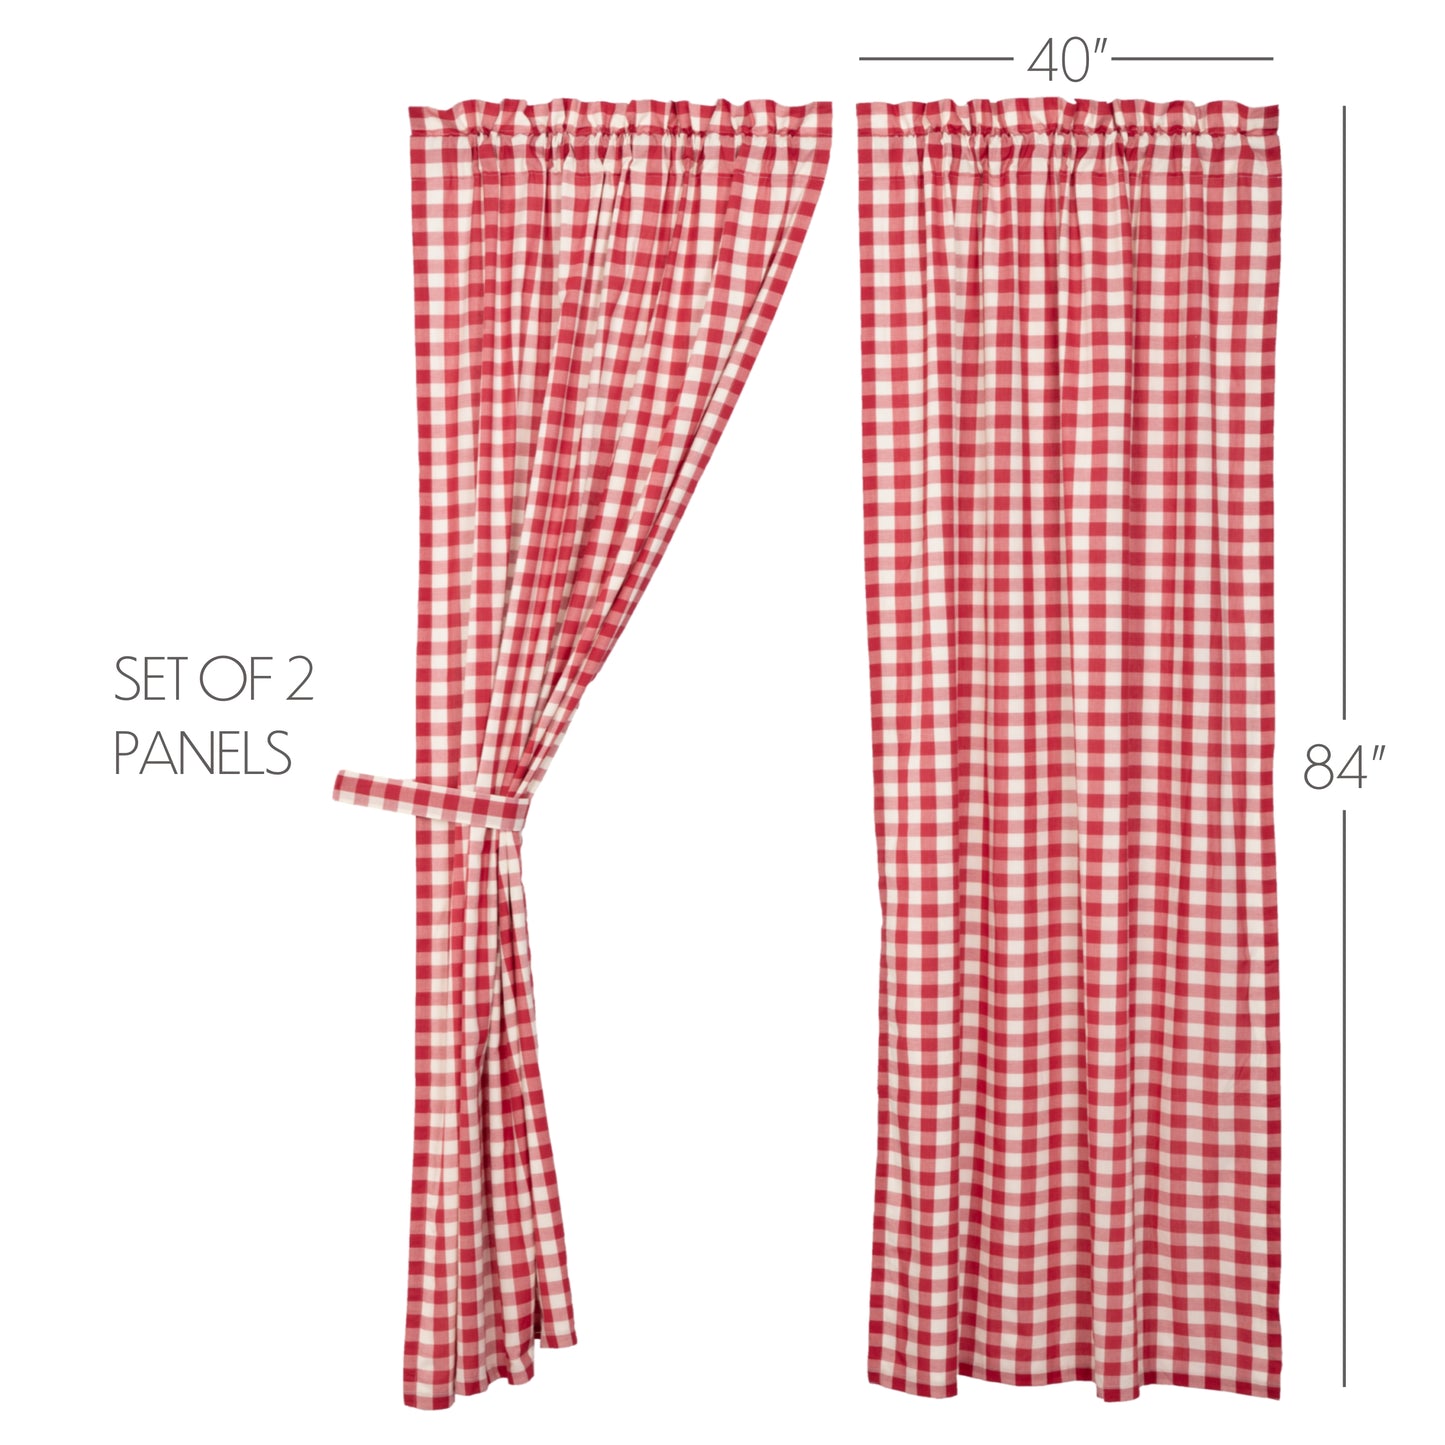 51125-Annie-Buffalo-Red-Check-Panel-Set-of-2-84x40-image-1